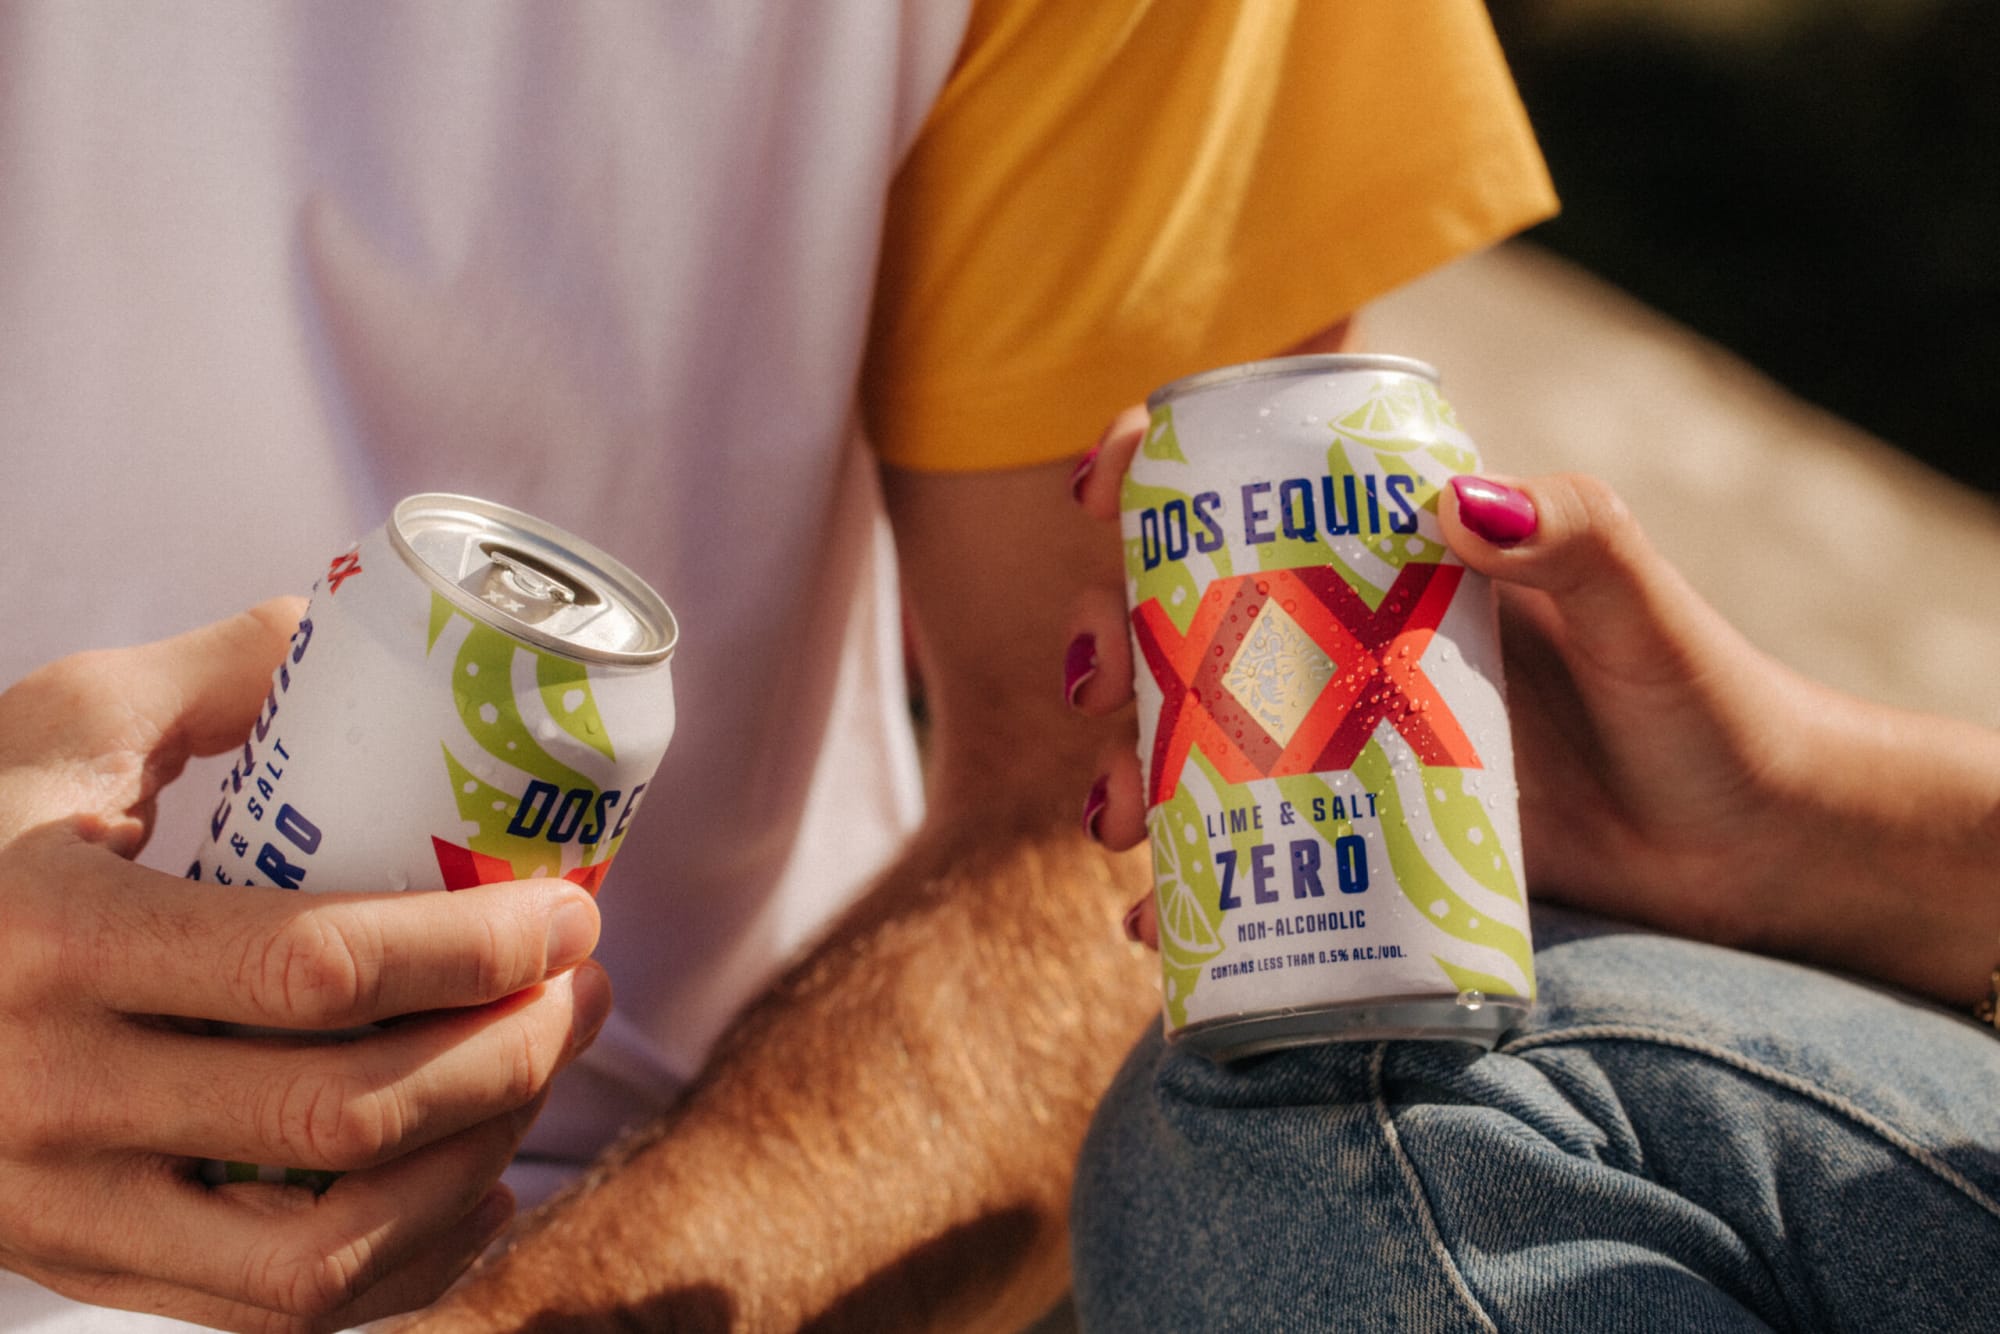 New Dos Equis non-alcoholic beverage bring flavor to sober curious choices